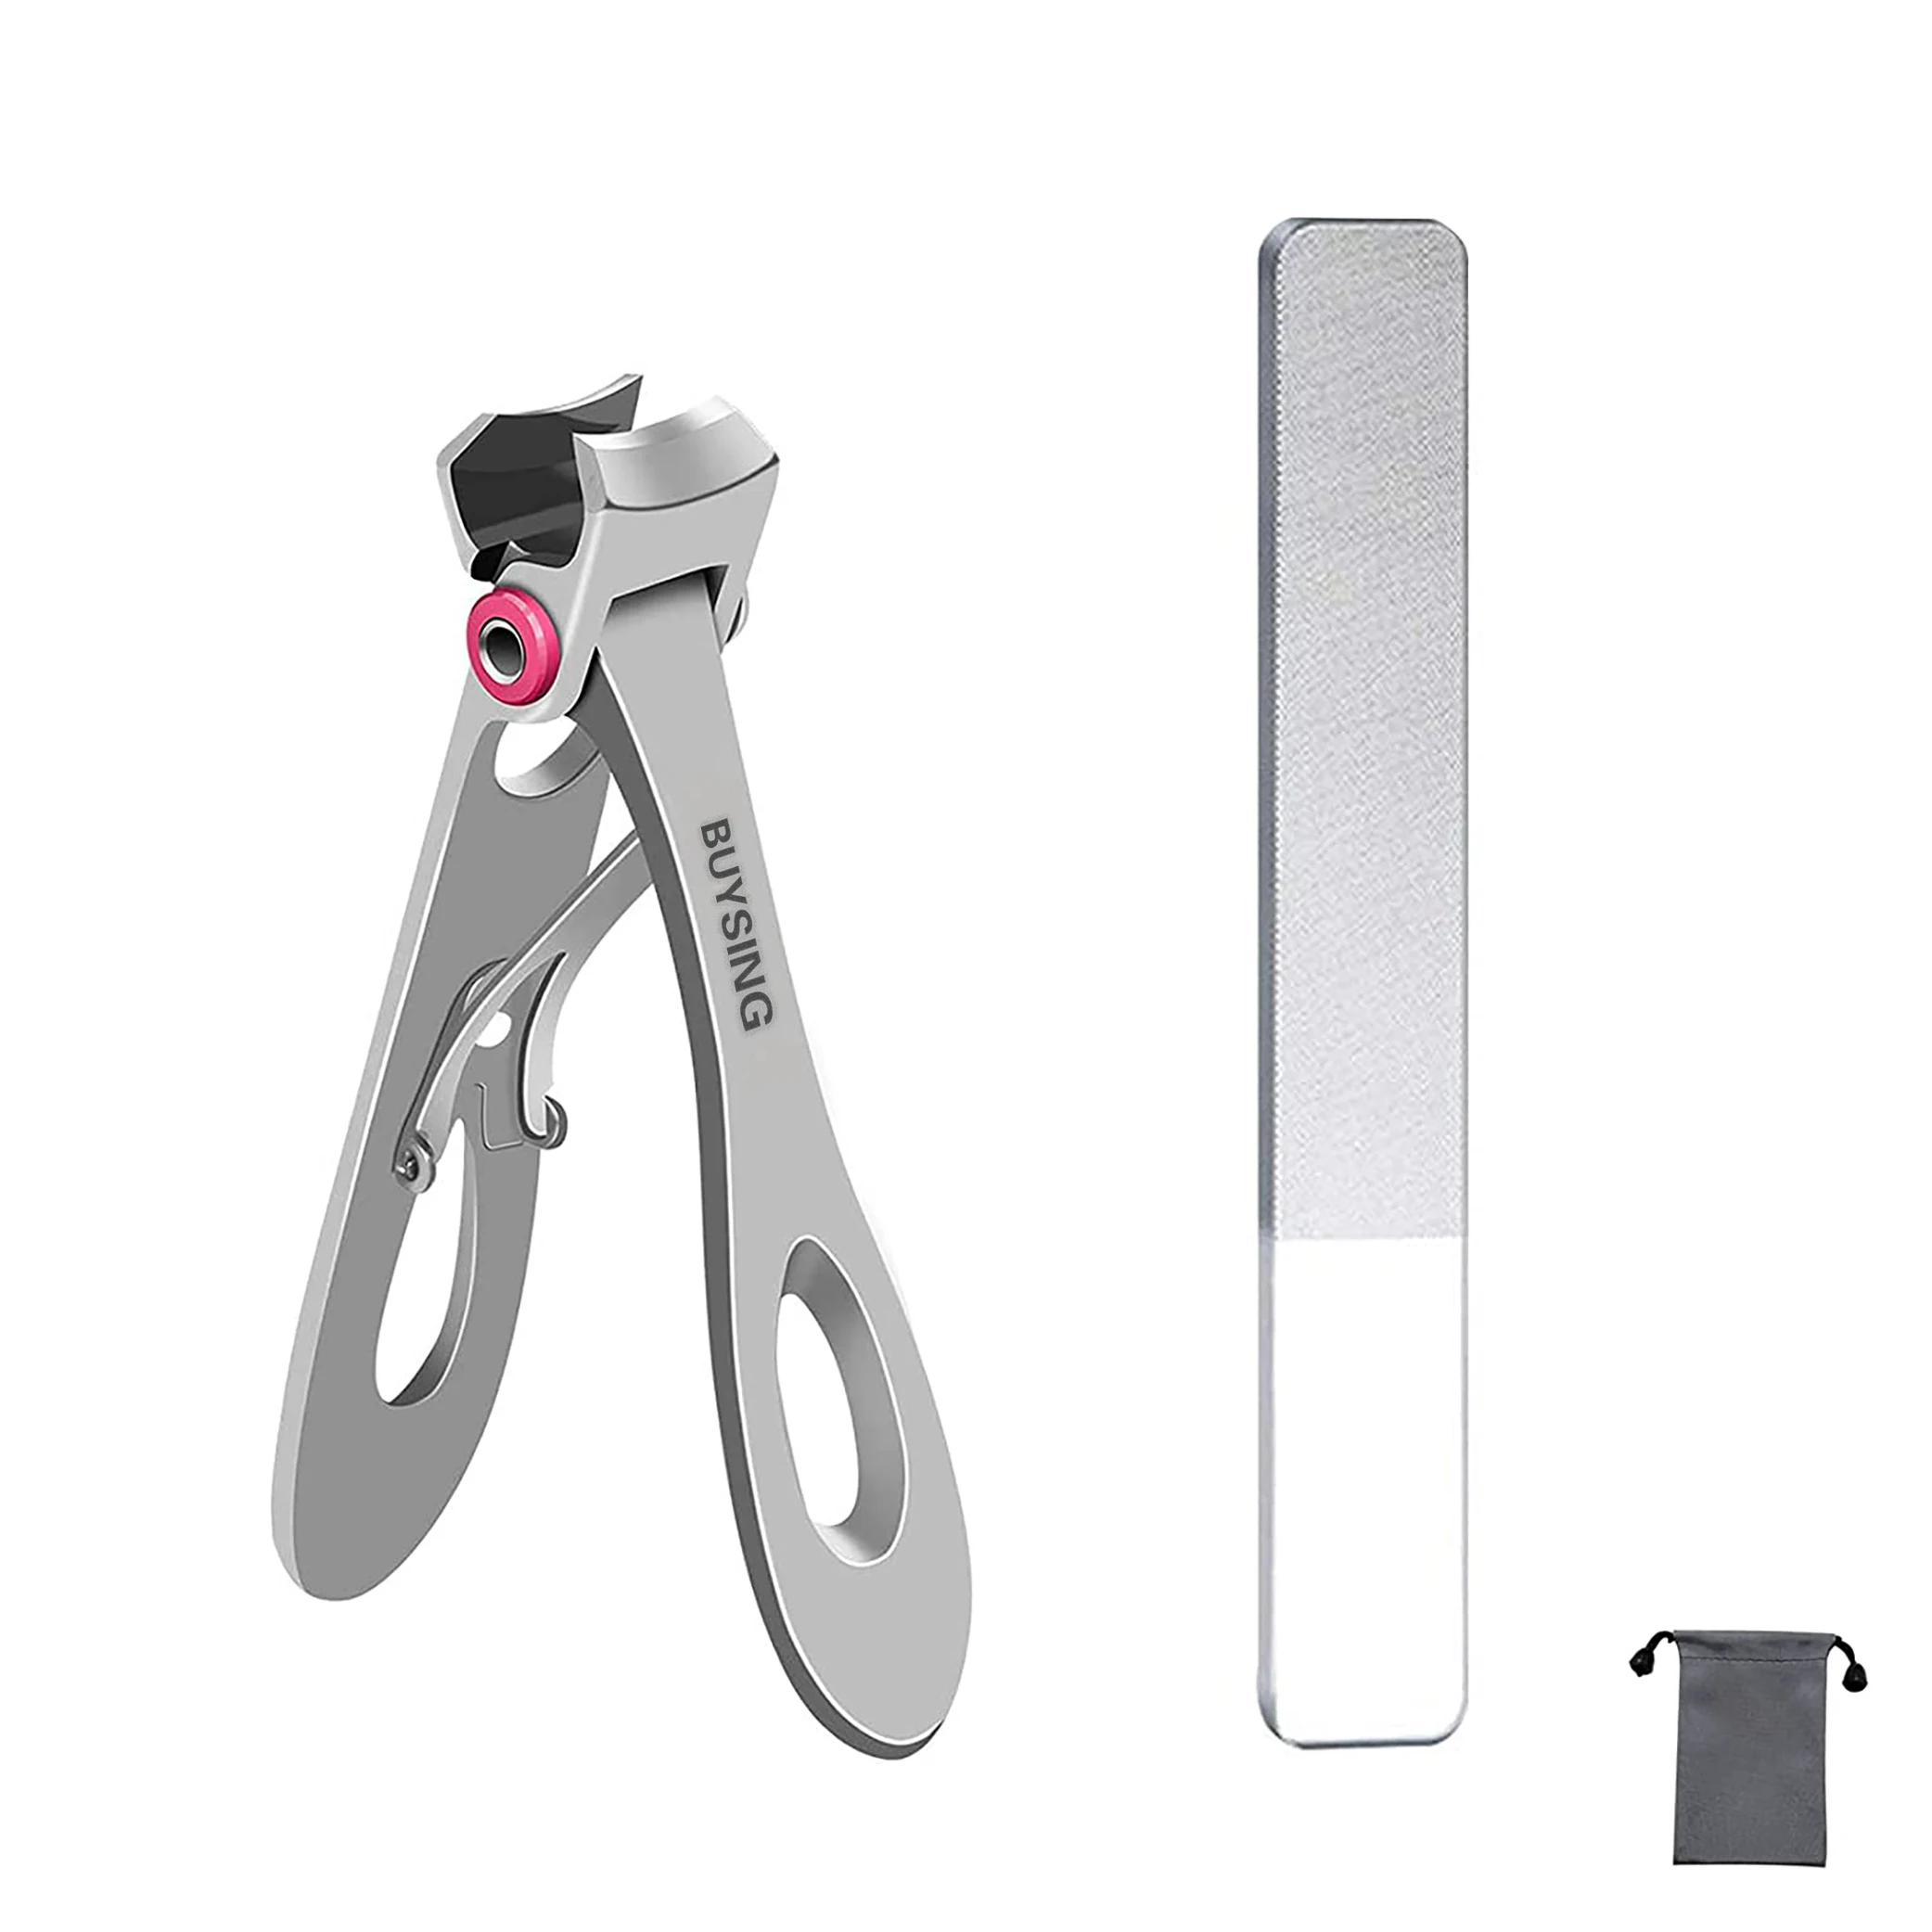 BUYSING Nail clippers dNail Cutter for Thick Nails,Small Fingernail Toe Nail Clippers for Adult Seniors Men Women